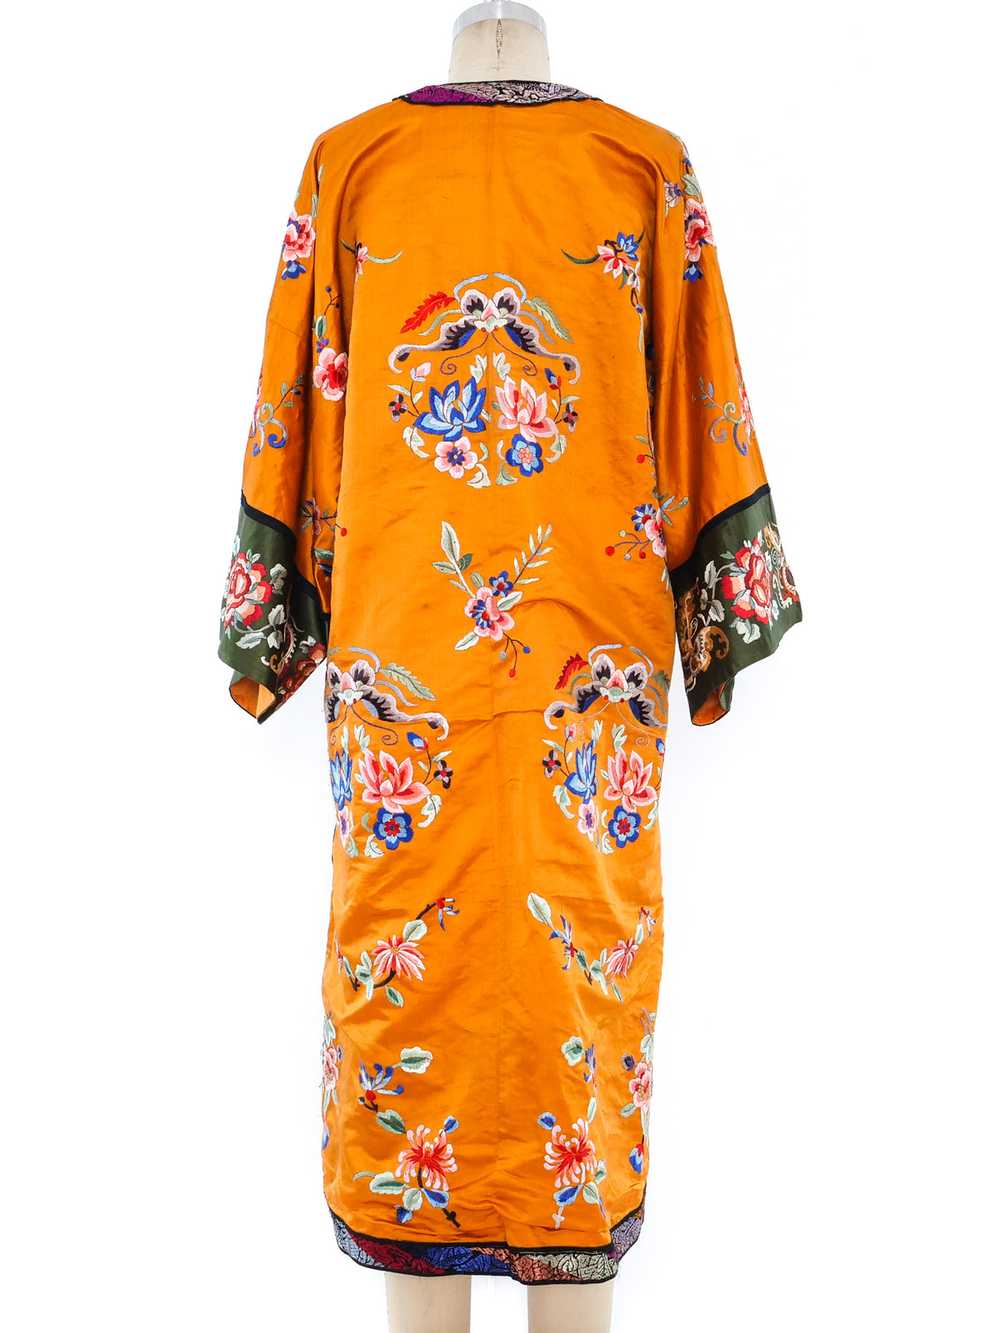 Embroidered Silk Chinese Jacket - image 2